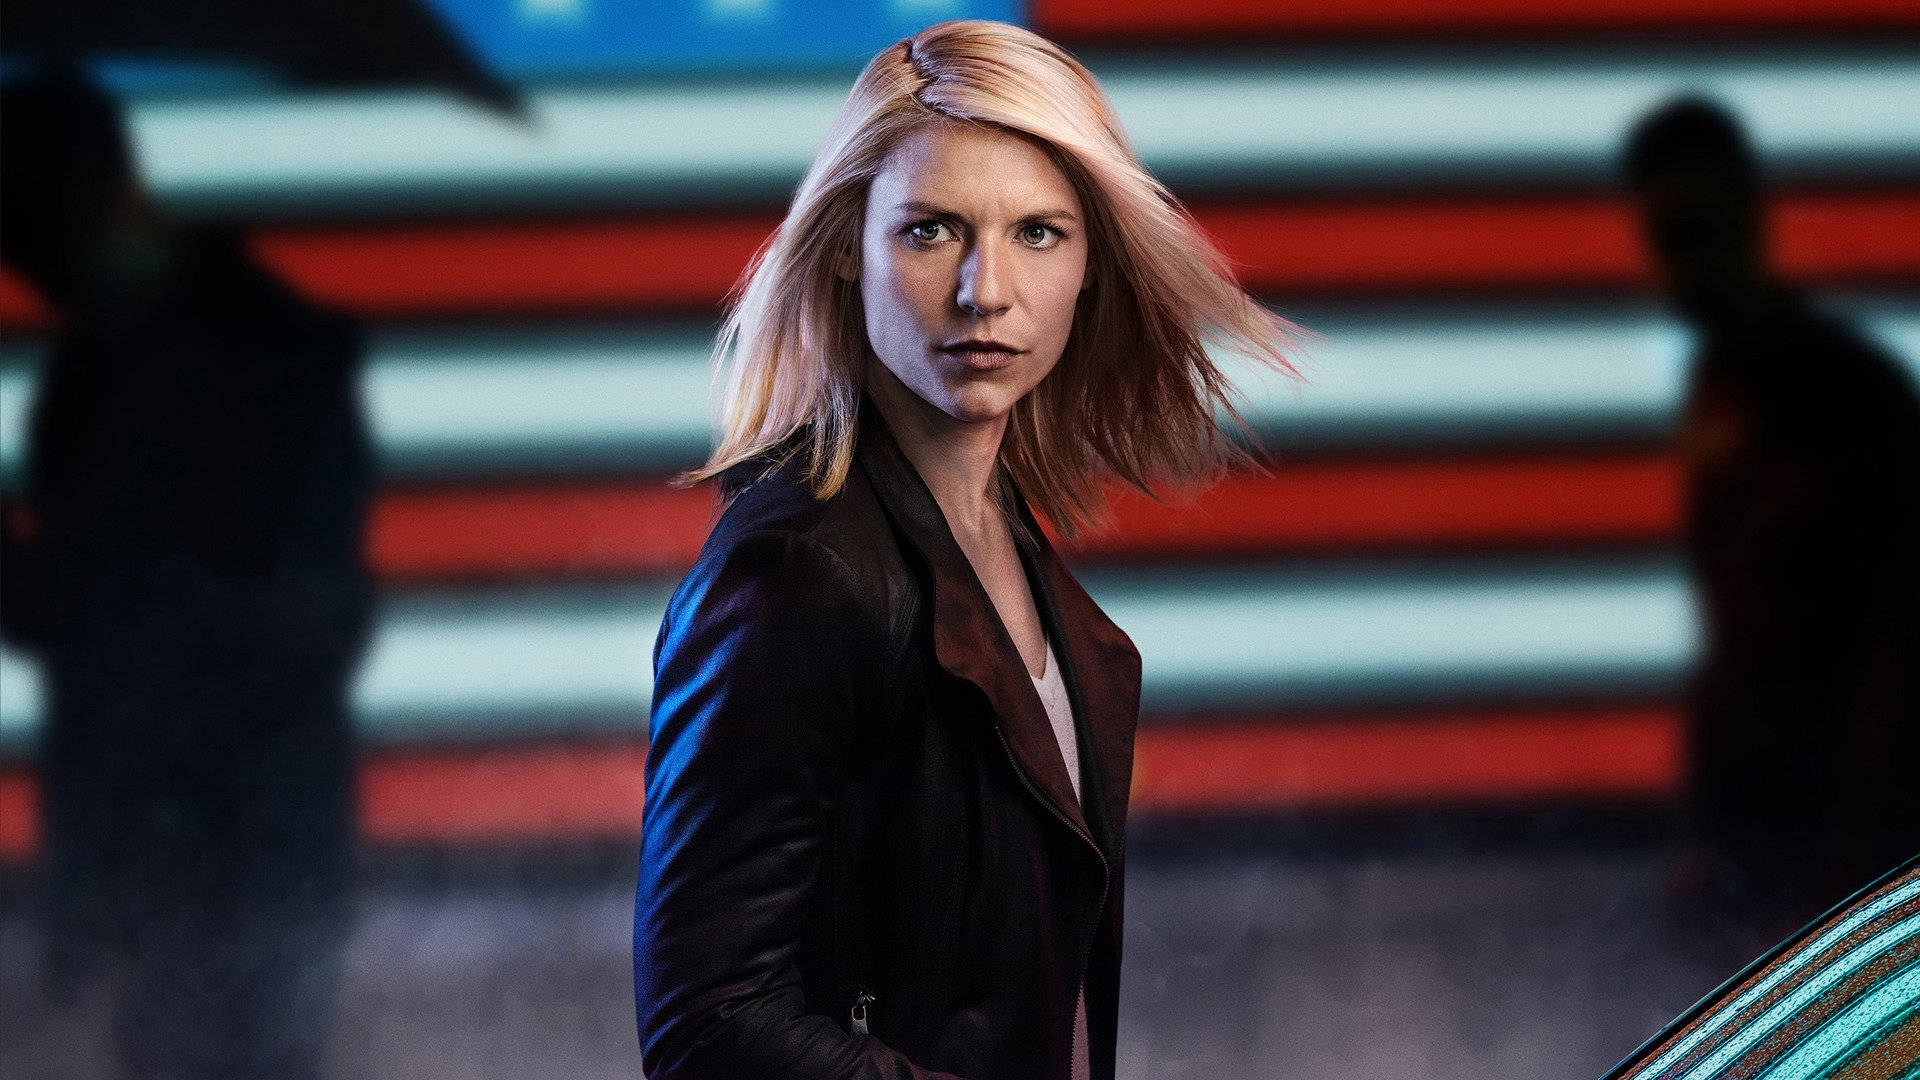 Claire Danes As Carrie Mathison Background